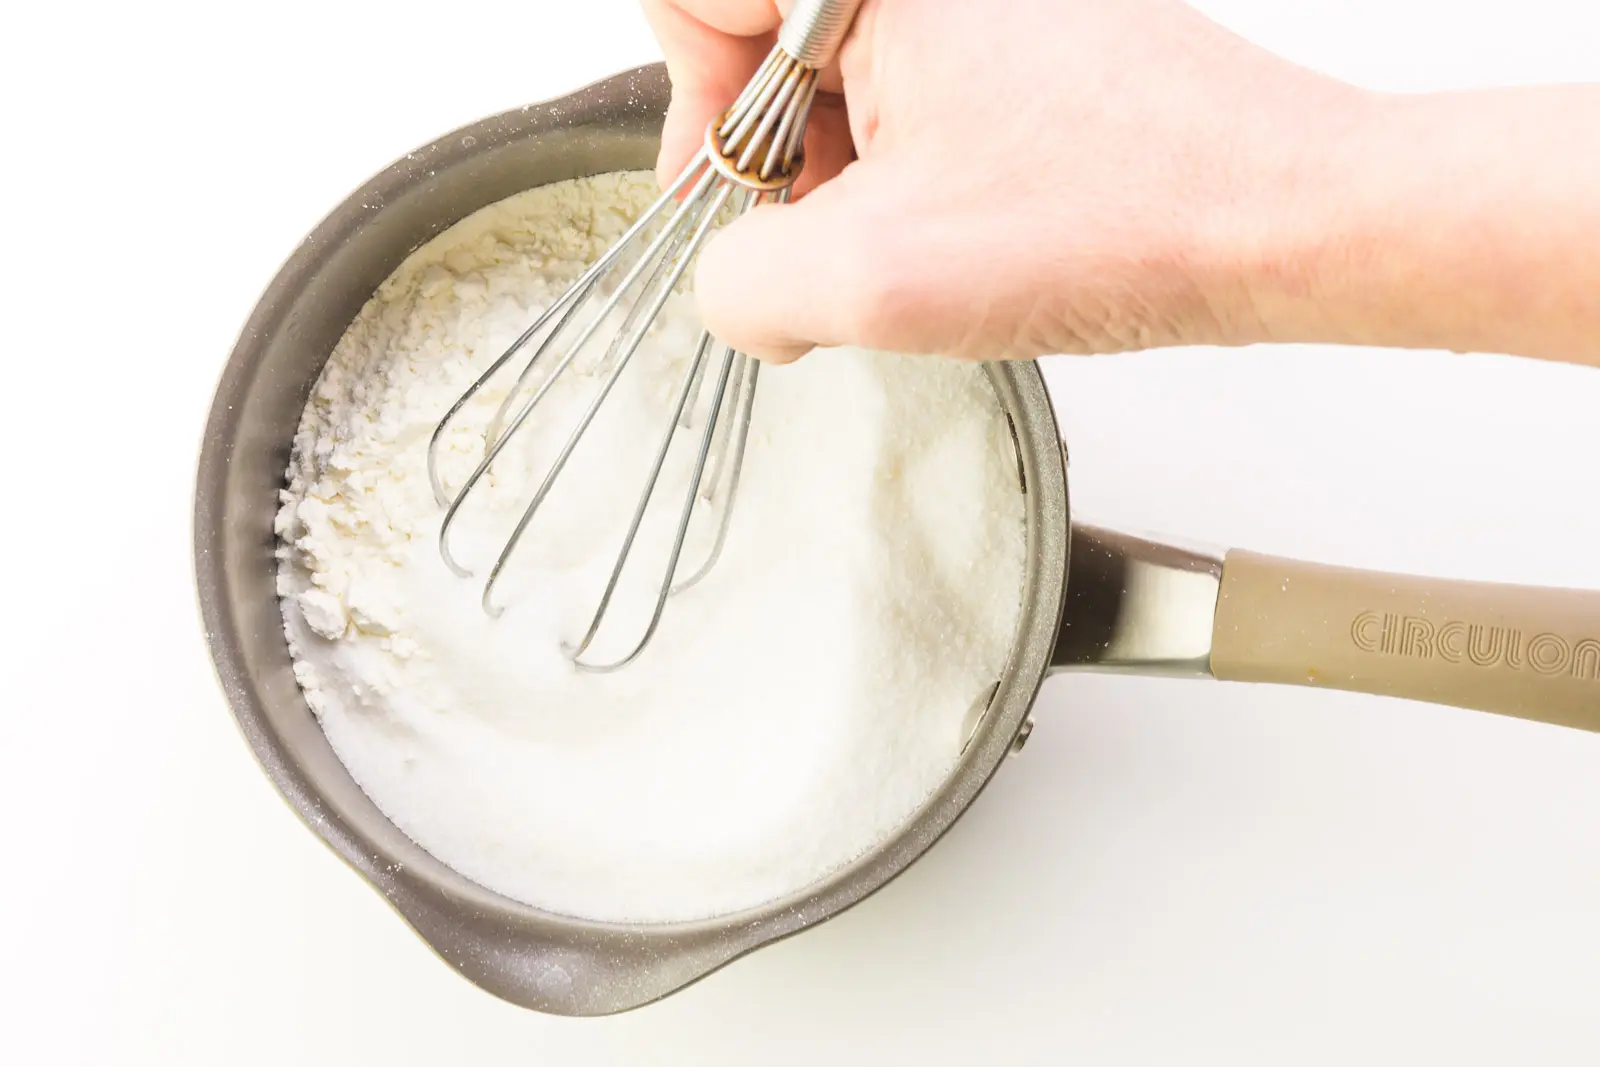 A hand holds a whisk, stirring flour and sugar together in a saucepan.